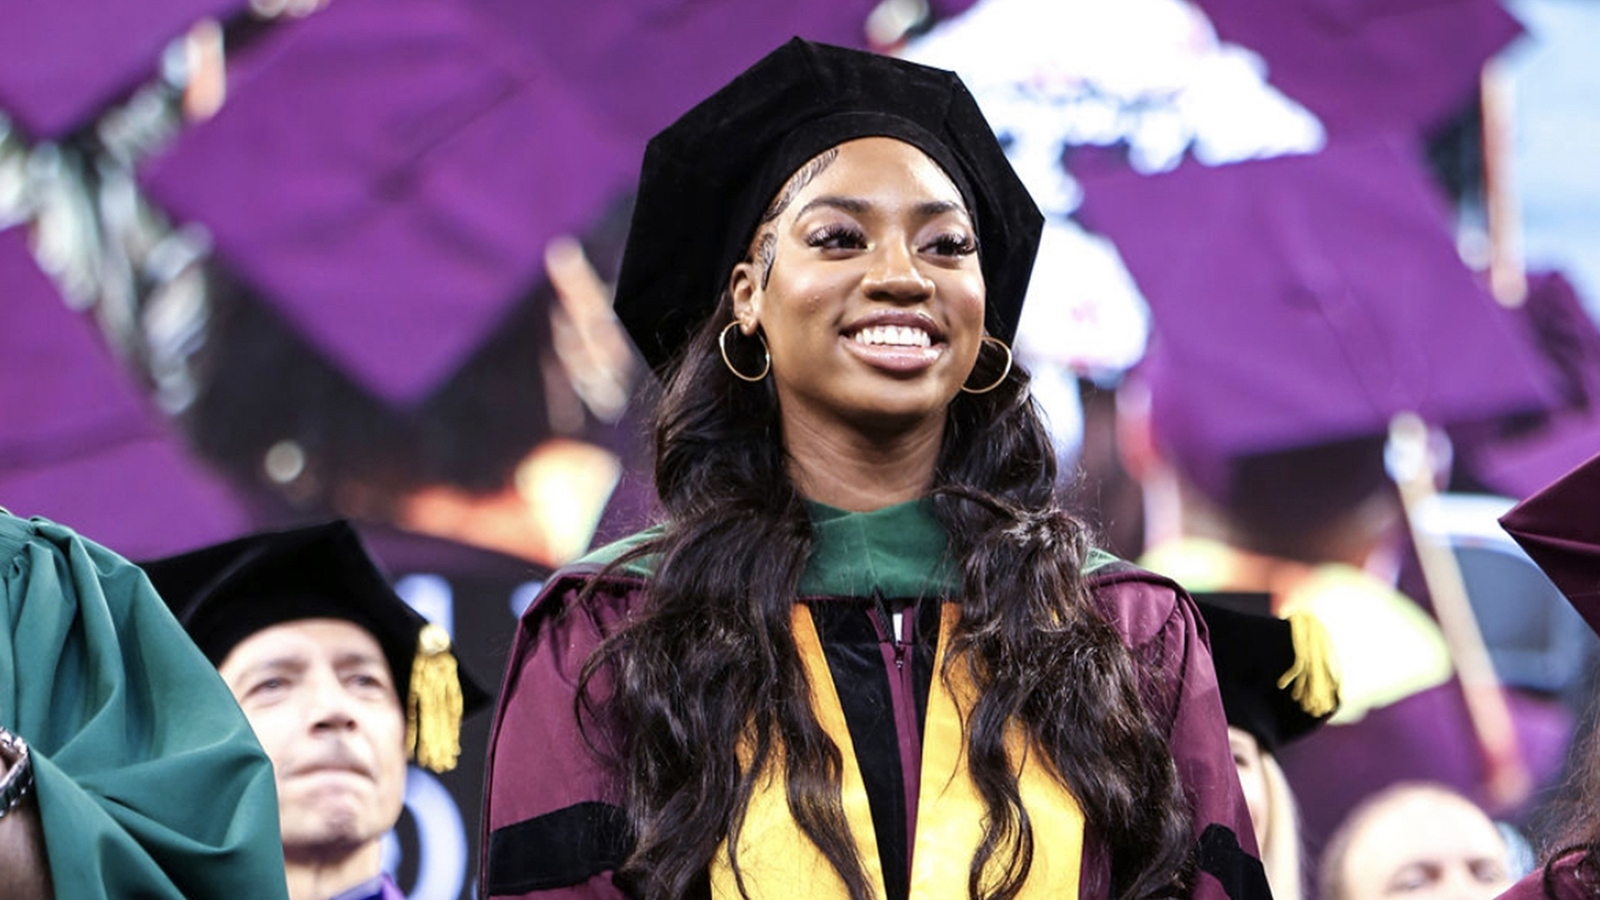 Dorothy Jean Tillman, a teen from Chicago, graduates from Arizona State University after completing doctoral degree at 17 [Video]